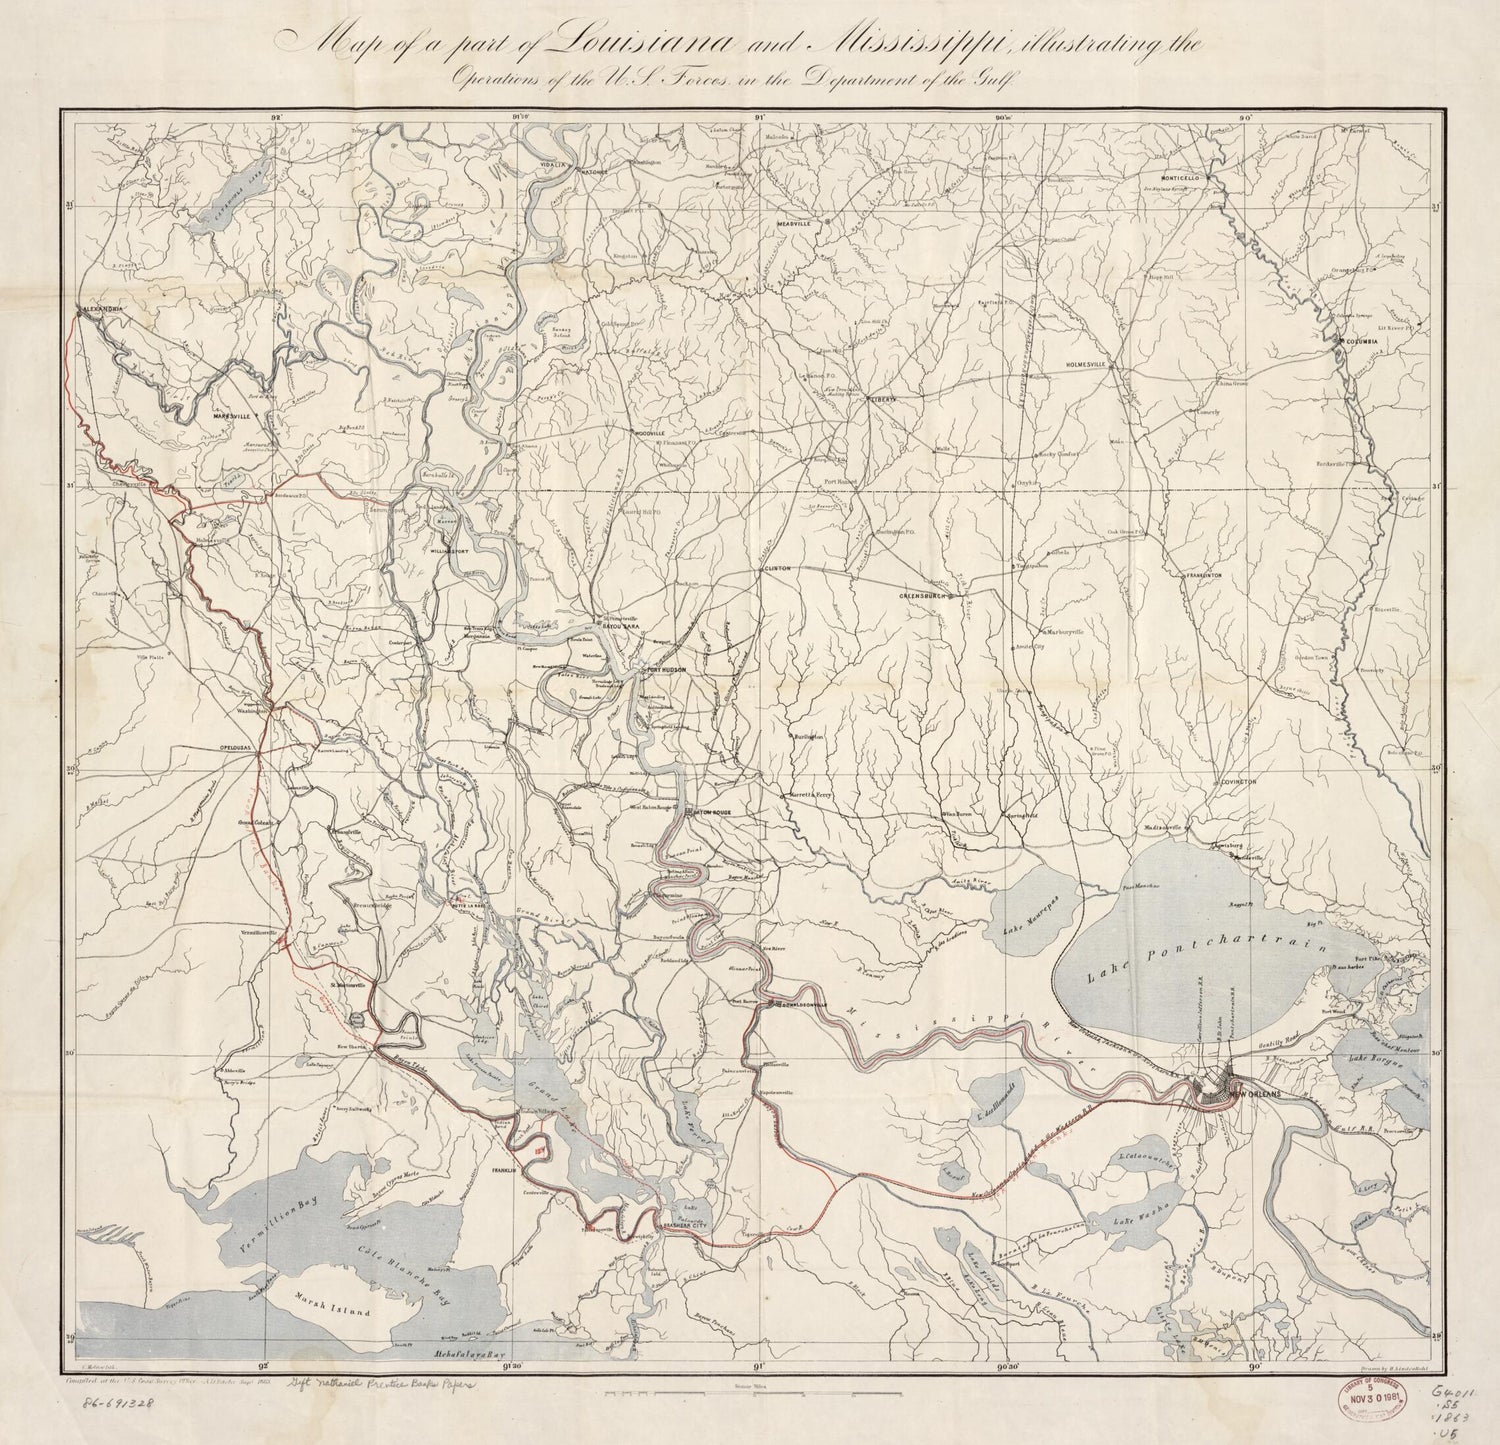 This old map of Map of a Part of Louisiana and Mississippi, Illustrating the Operations of the U.S. Forces In the Department of the Gulf from 1863 was created by A. D. (Alexander Dallas) Bache, Nathaniel Prentiss Banks, H. (Henry) Lindenkohl, E. Molitor,